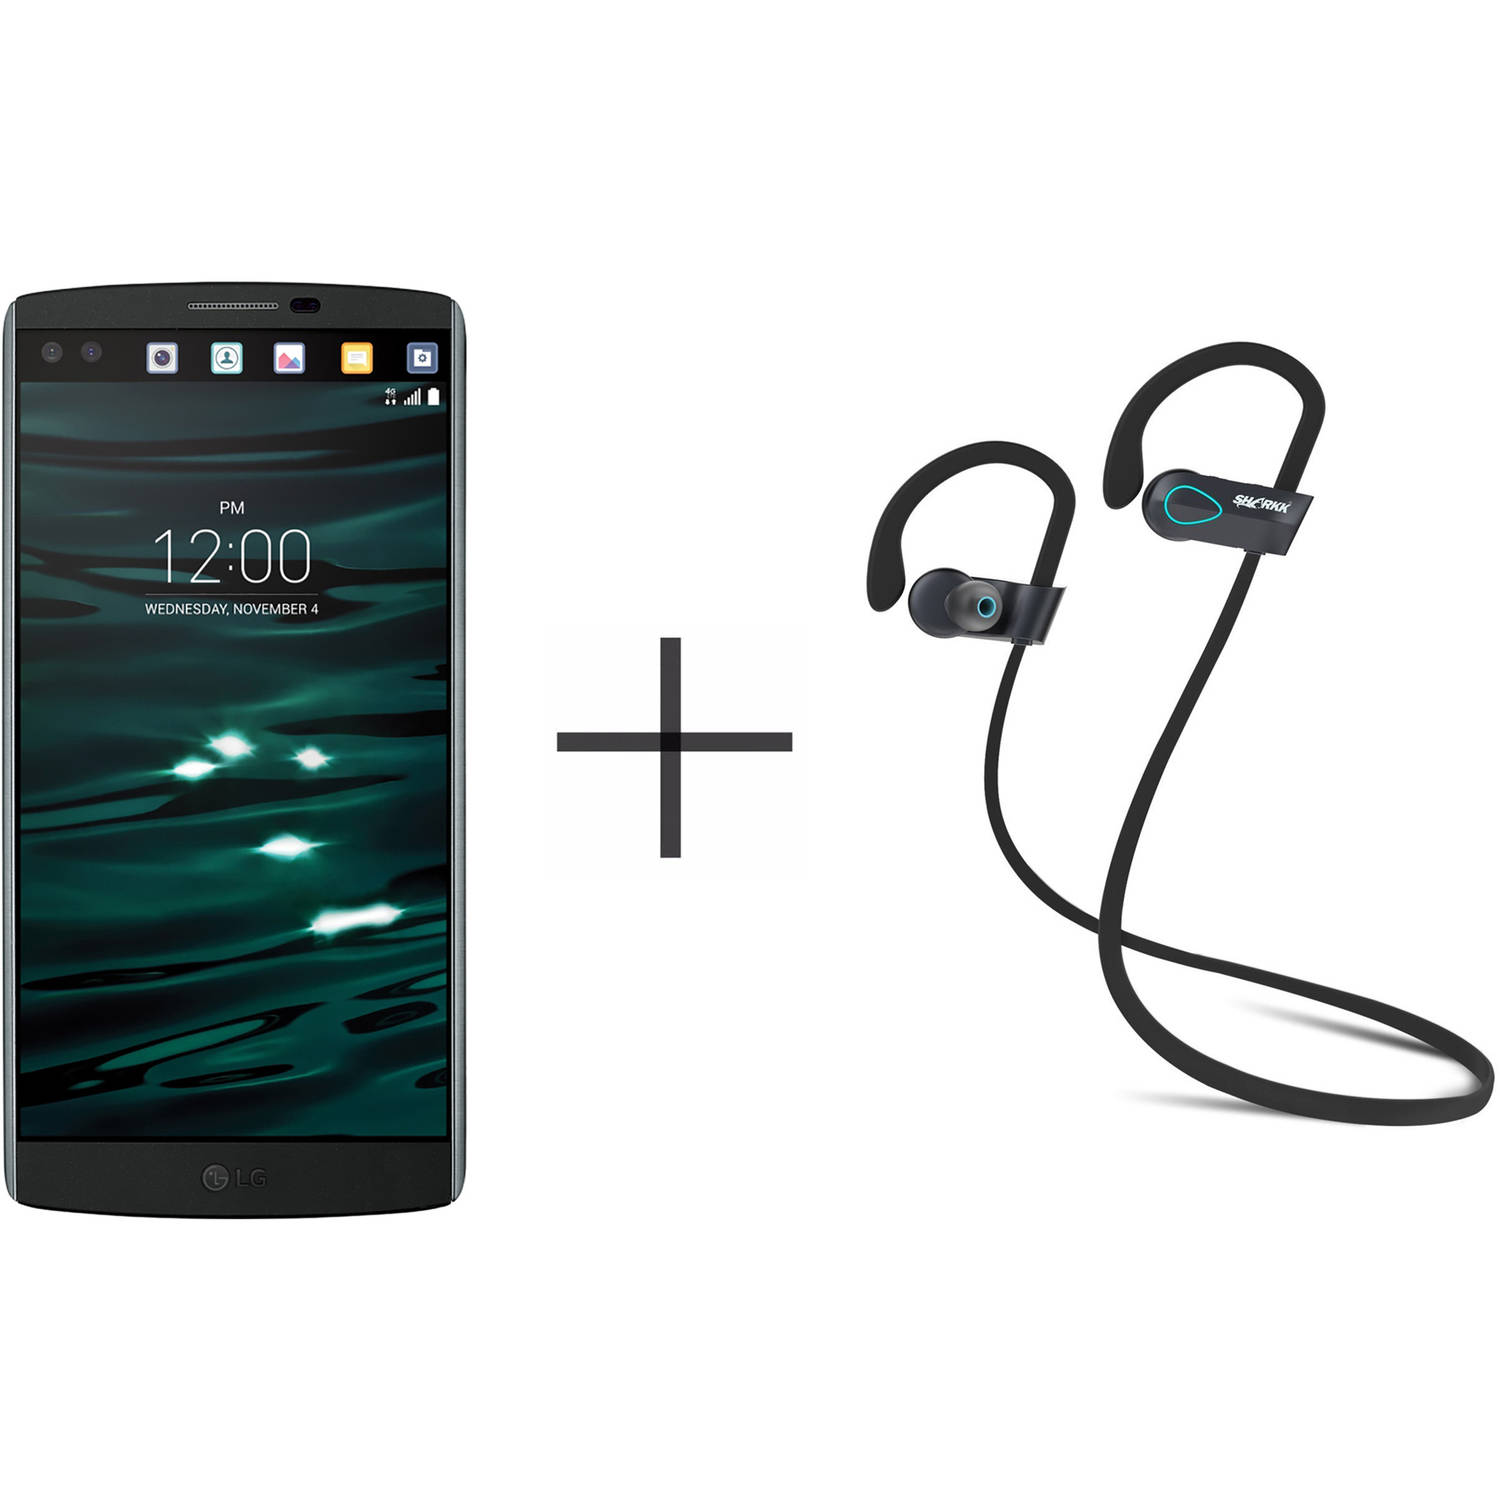 LG V10 H900 AT&T Smartphone and SHARKK Flex 20 Wireless Bluetooth Waterproof Headphones with Mic, Black (Value Bundle) - image 1 of 20